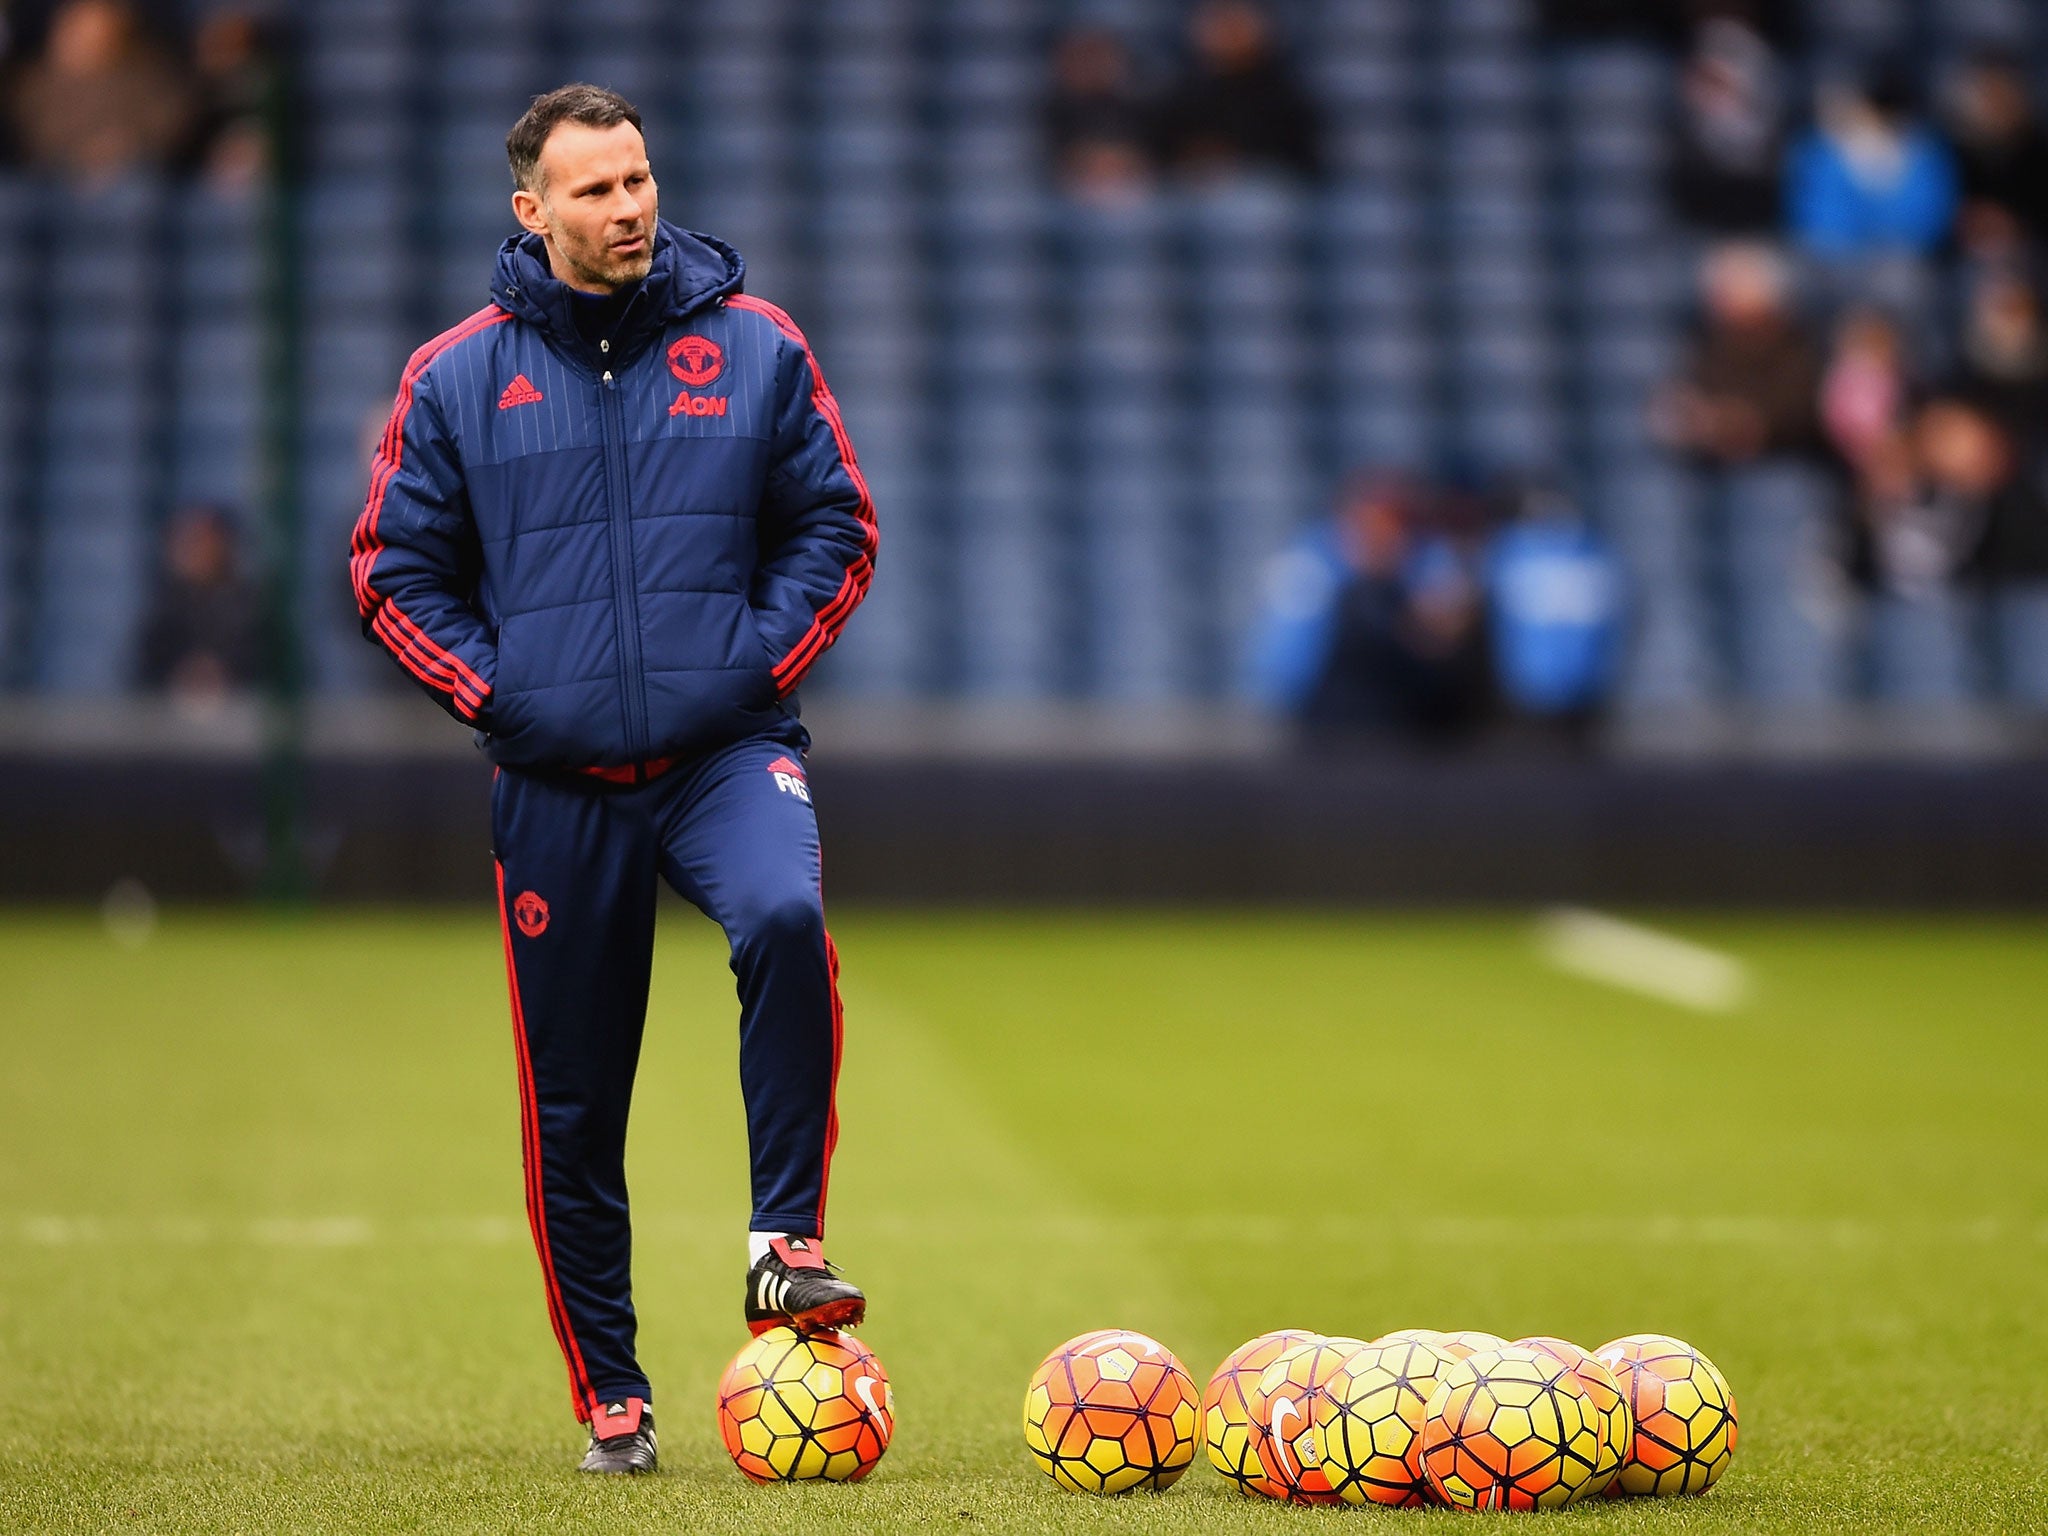 Ryan Giggs is now looking ahead to life beyond Manchester United